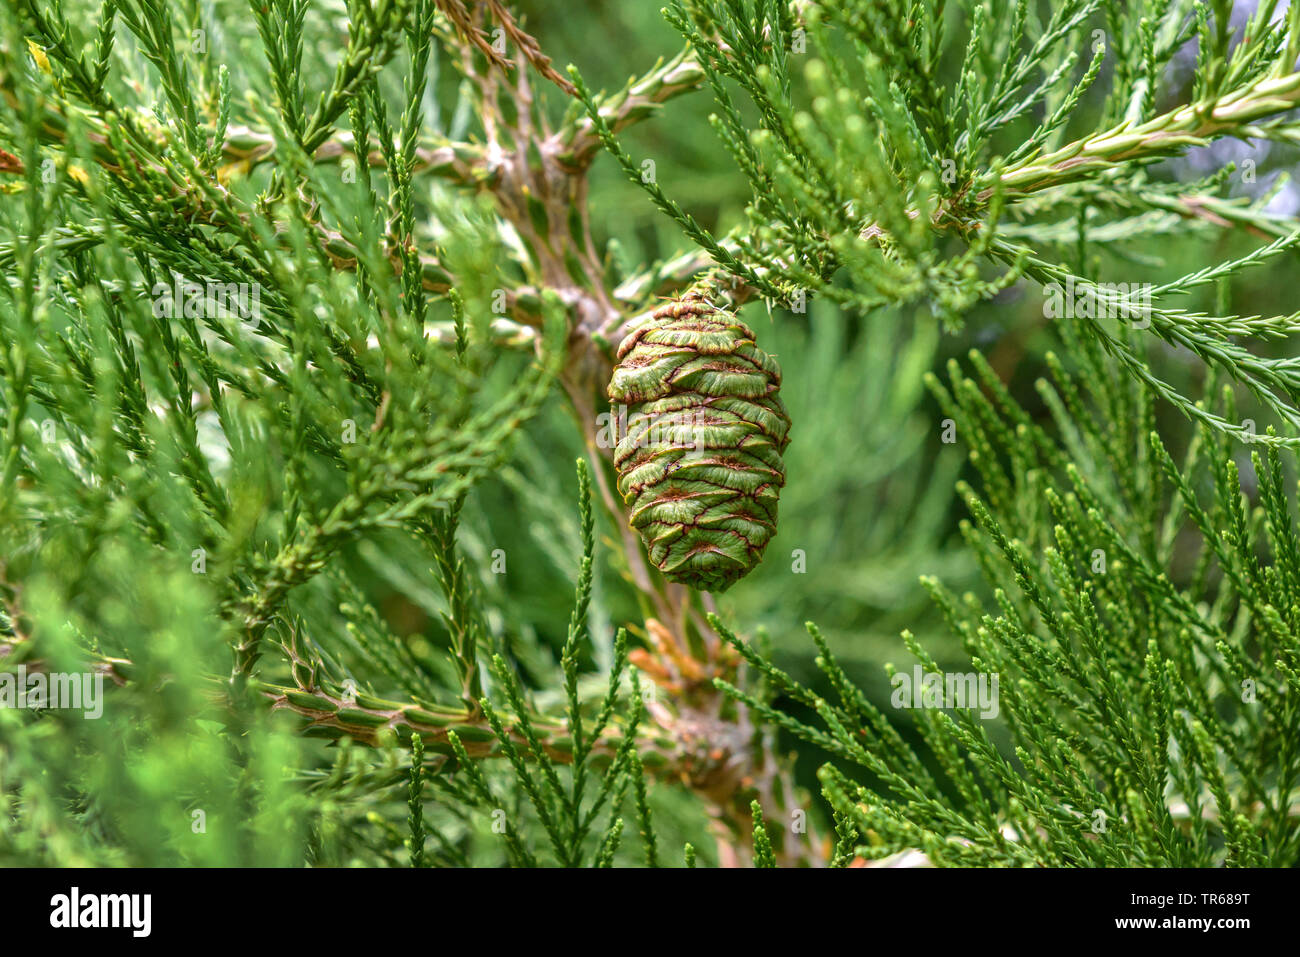 giant sequoia, giant redwood (Sequoiadendron giganteum), cone on a branch, Germany, Baden-Wuerttemberg Stock Photo